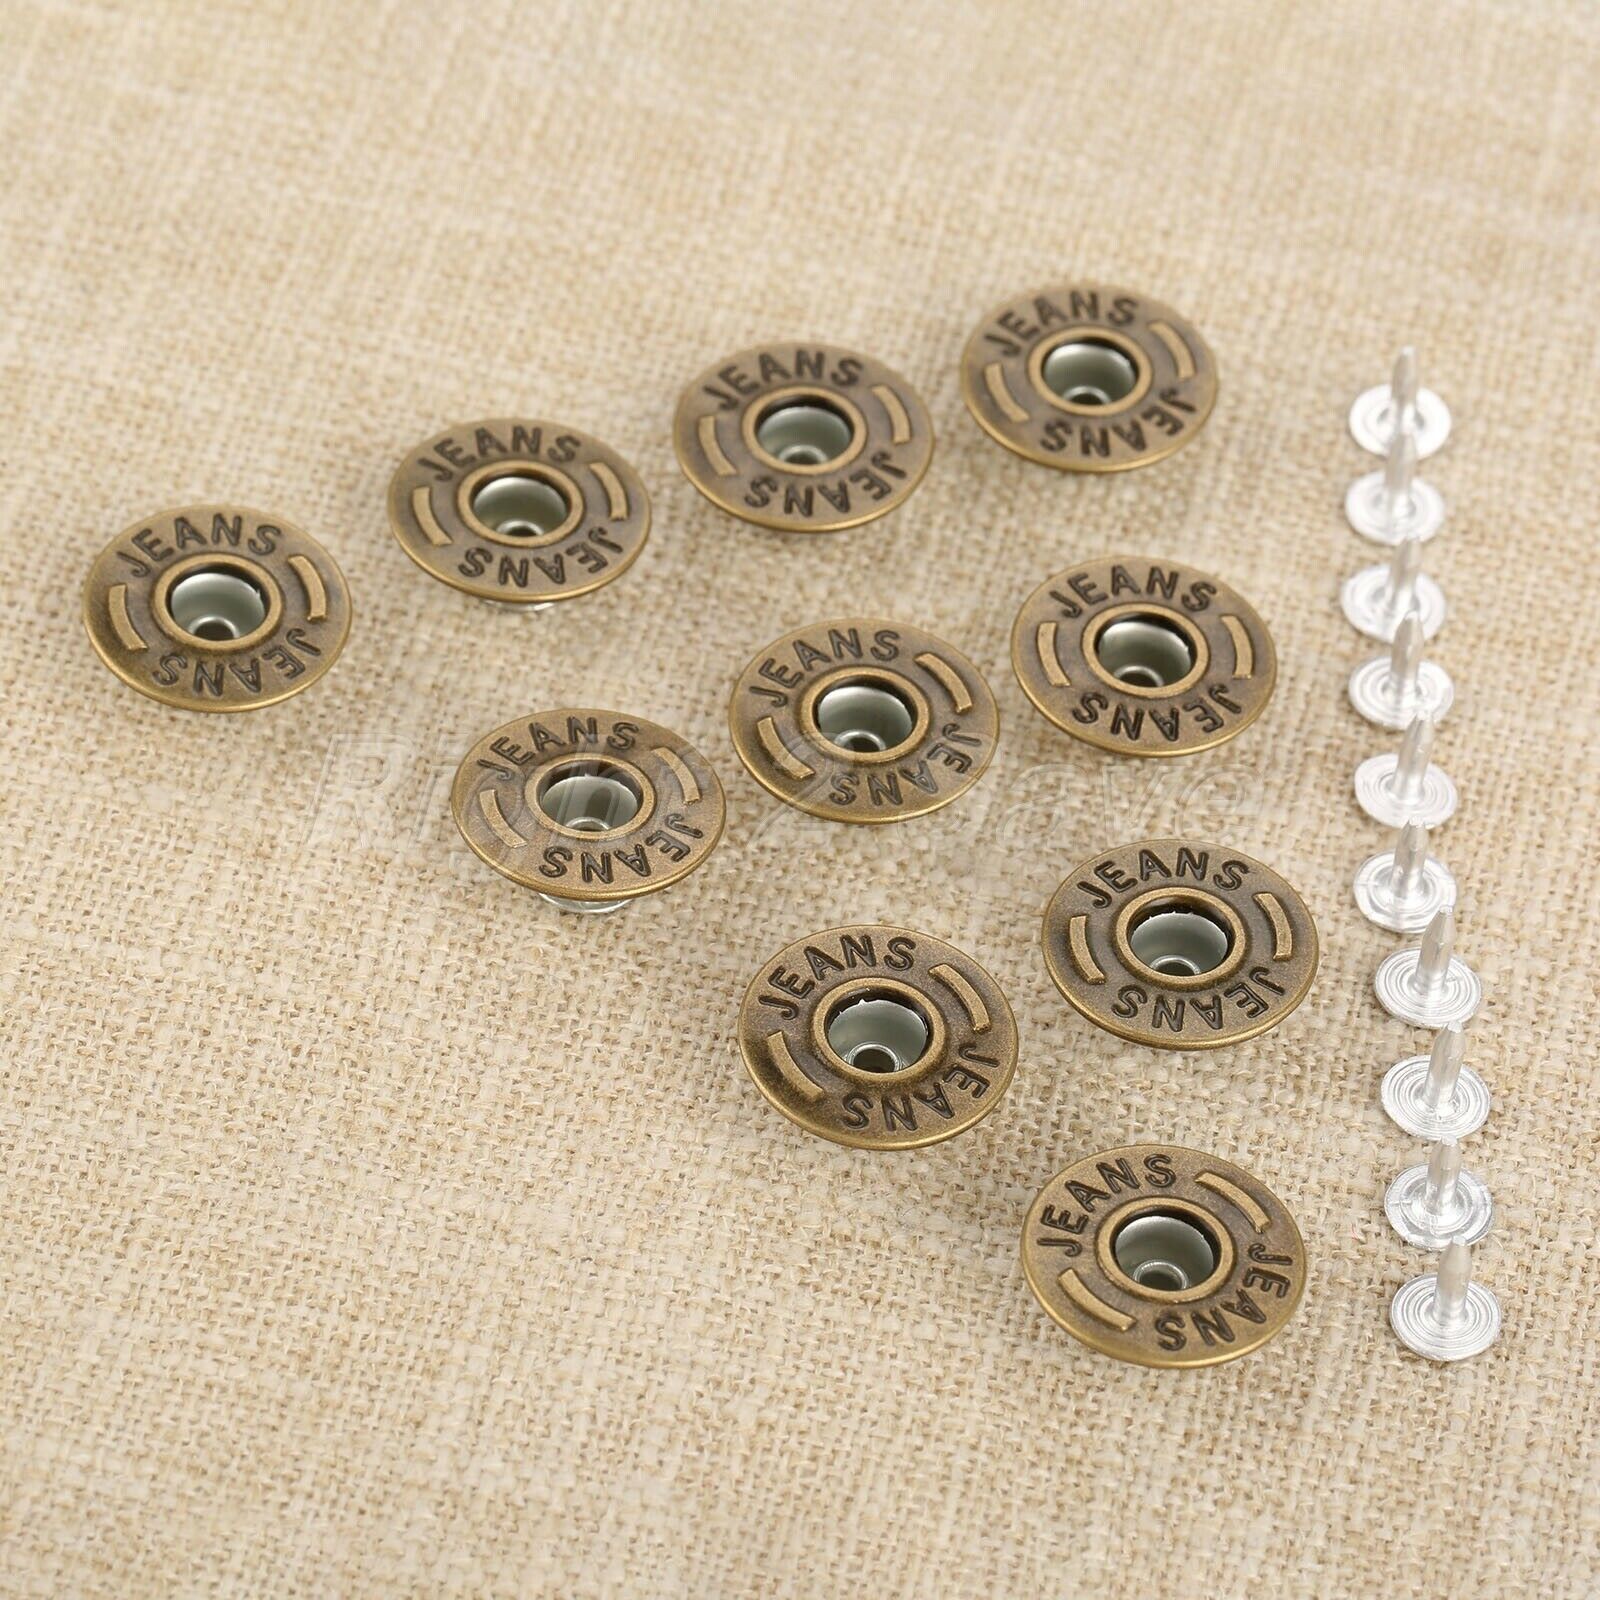 50Pcs 20mm Bronze Jeans Buttons Metal DIY Shank + 50 Nails For Jeans Fasterners